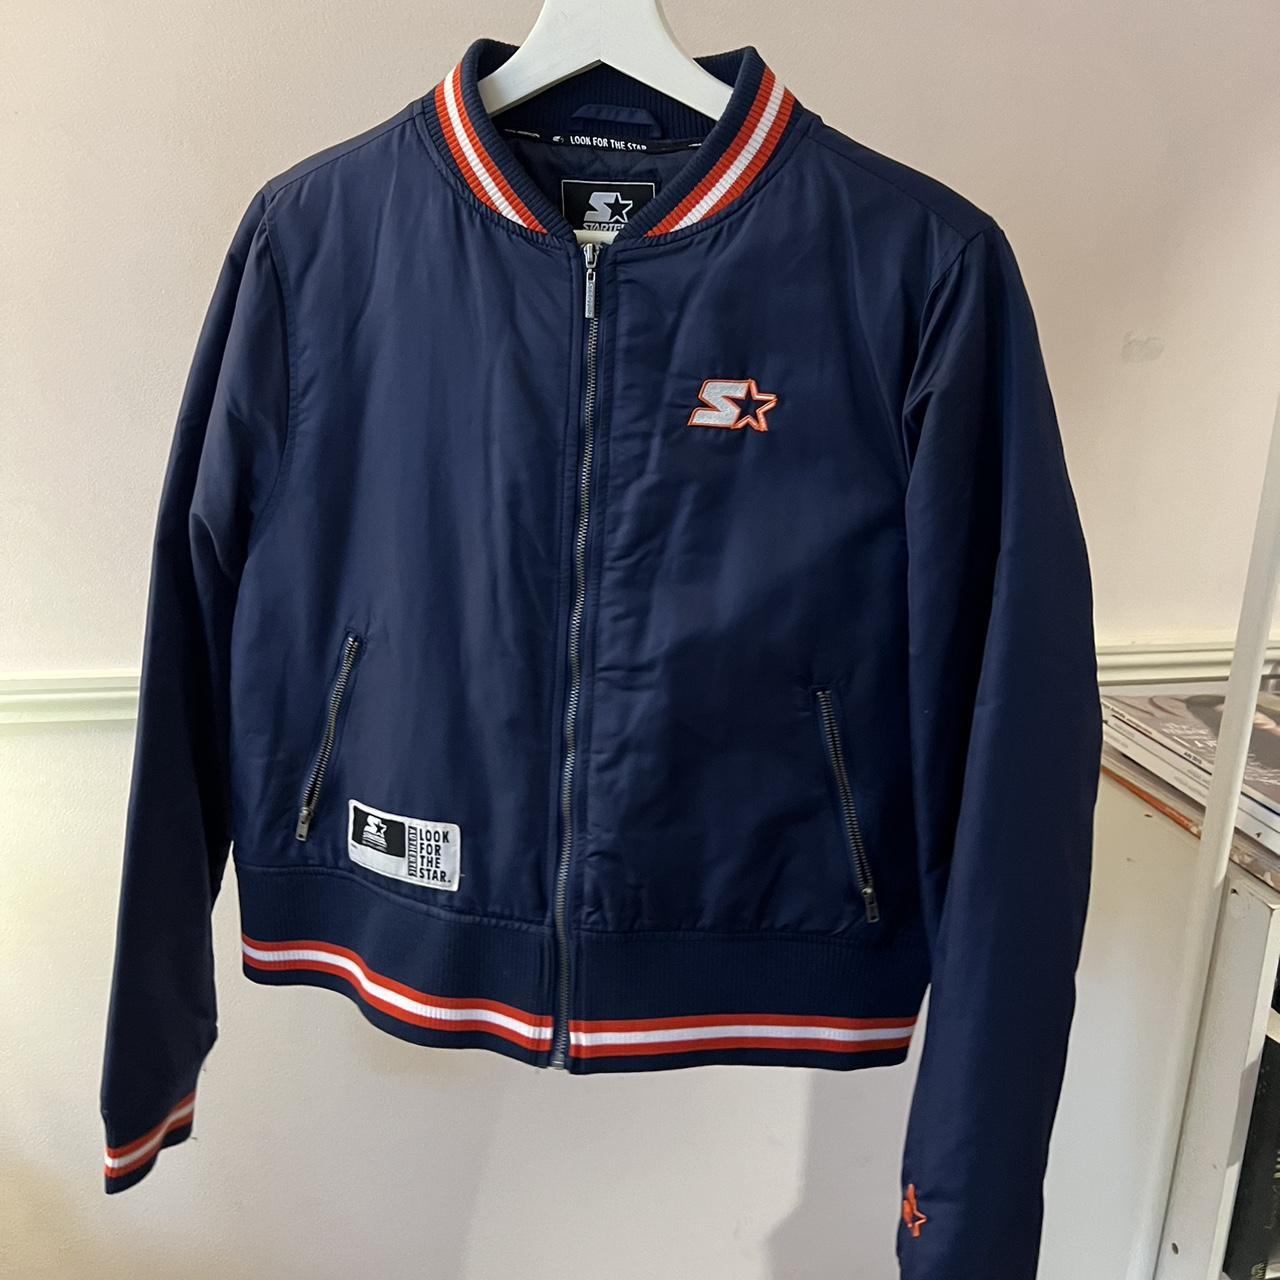 Starter bomber jacket No tags but in perfect... - Depop